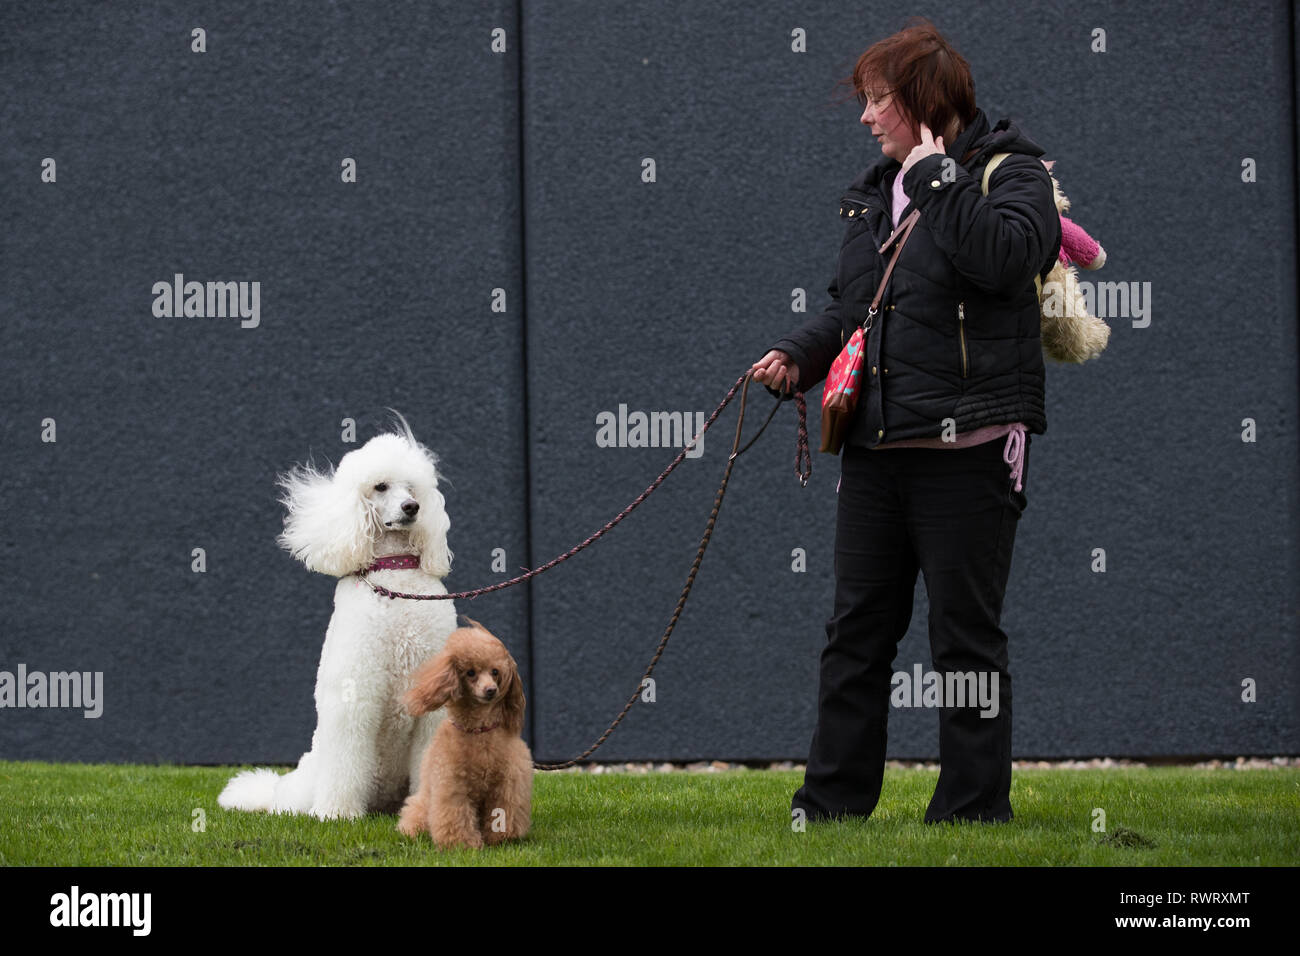 A lady arrives with a Poodle and Toy Poodle at the Birmingham National Exhibition Centre (NEC) for the first day of the Crufts Dog Show. Stock Photo